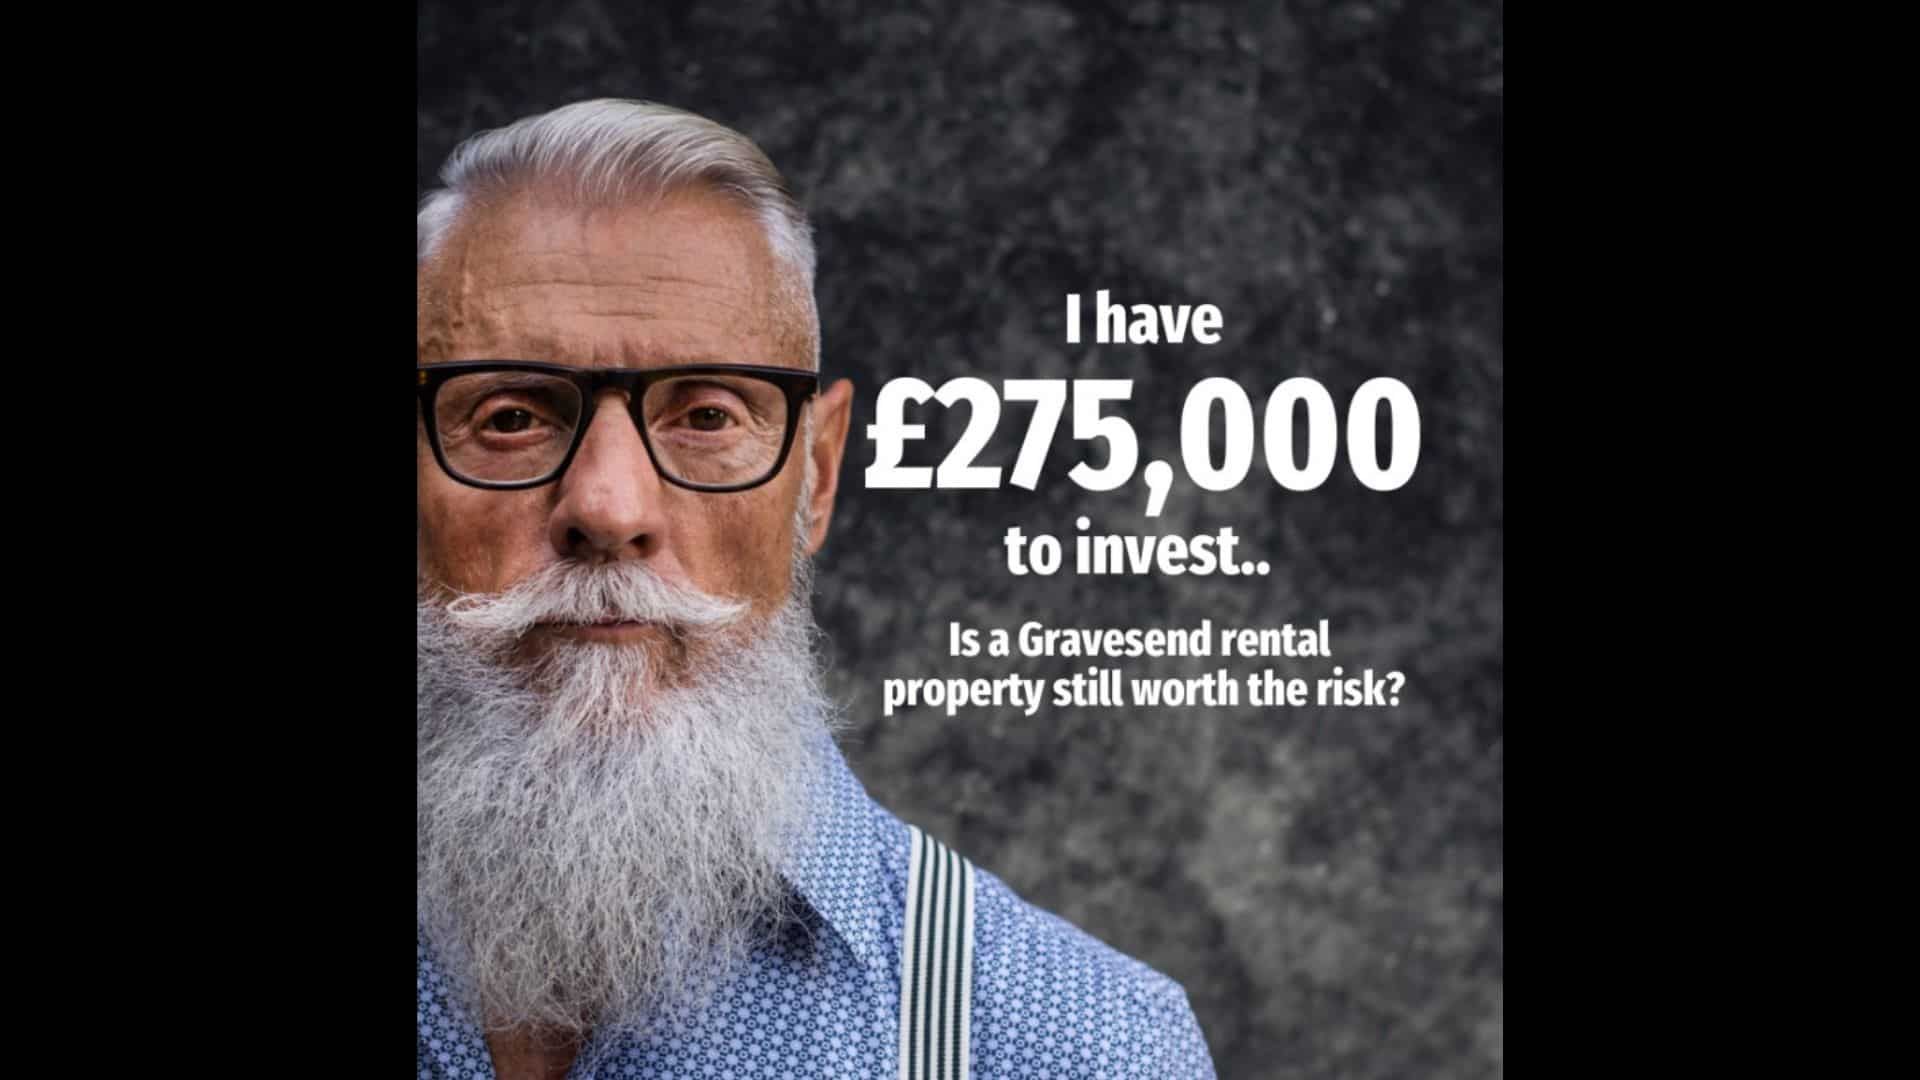 I Have £275,000 To Invest – Is A Gravesend Rental Property Still Worth The Risk?